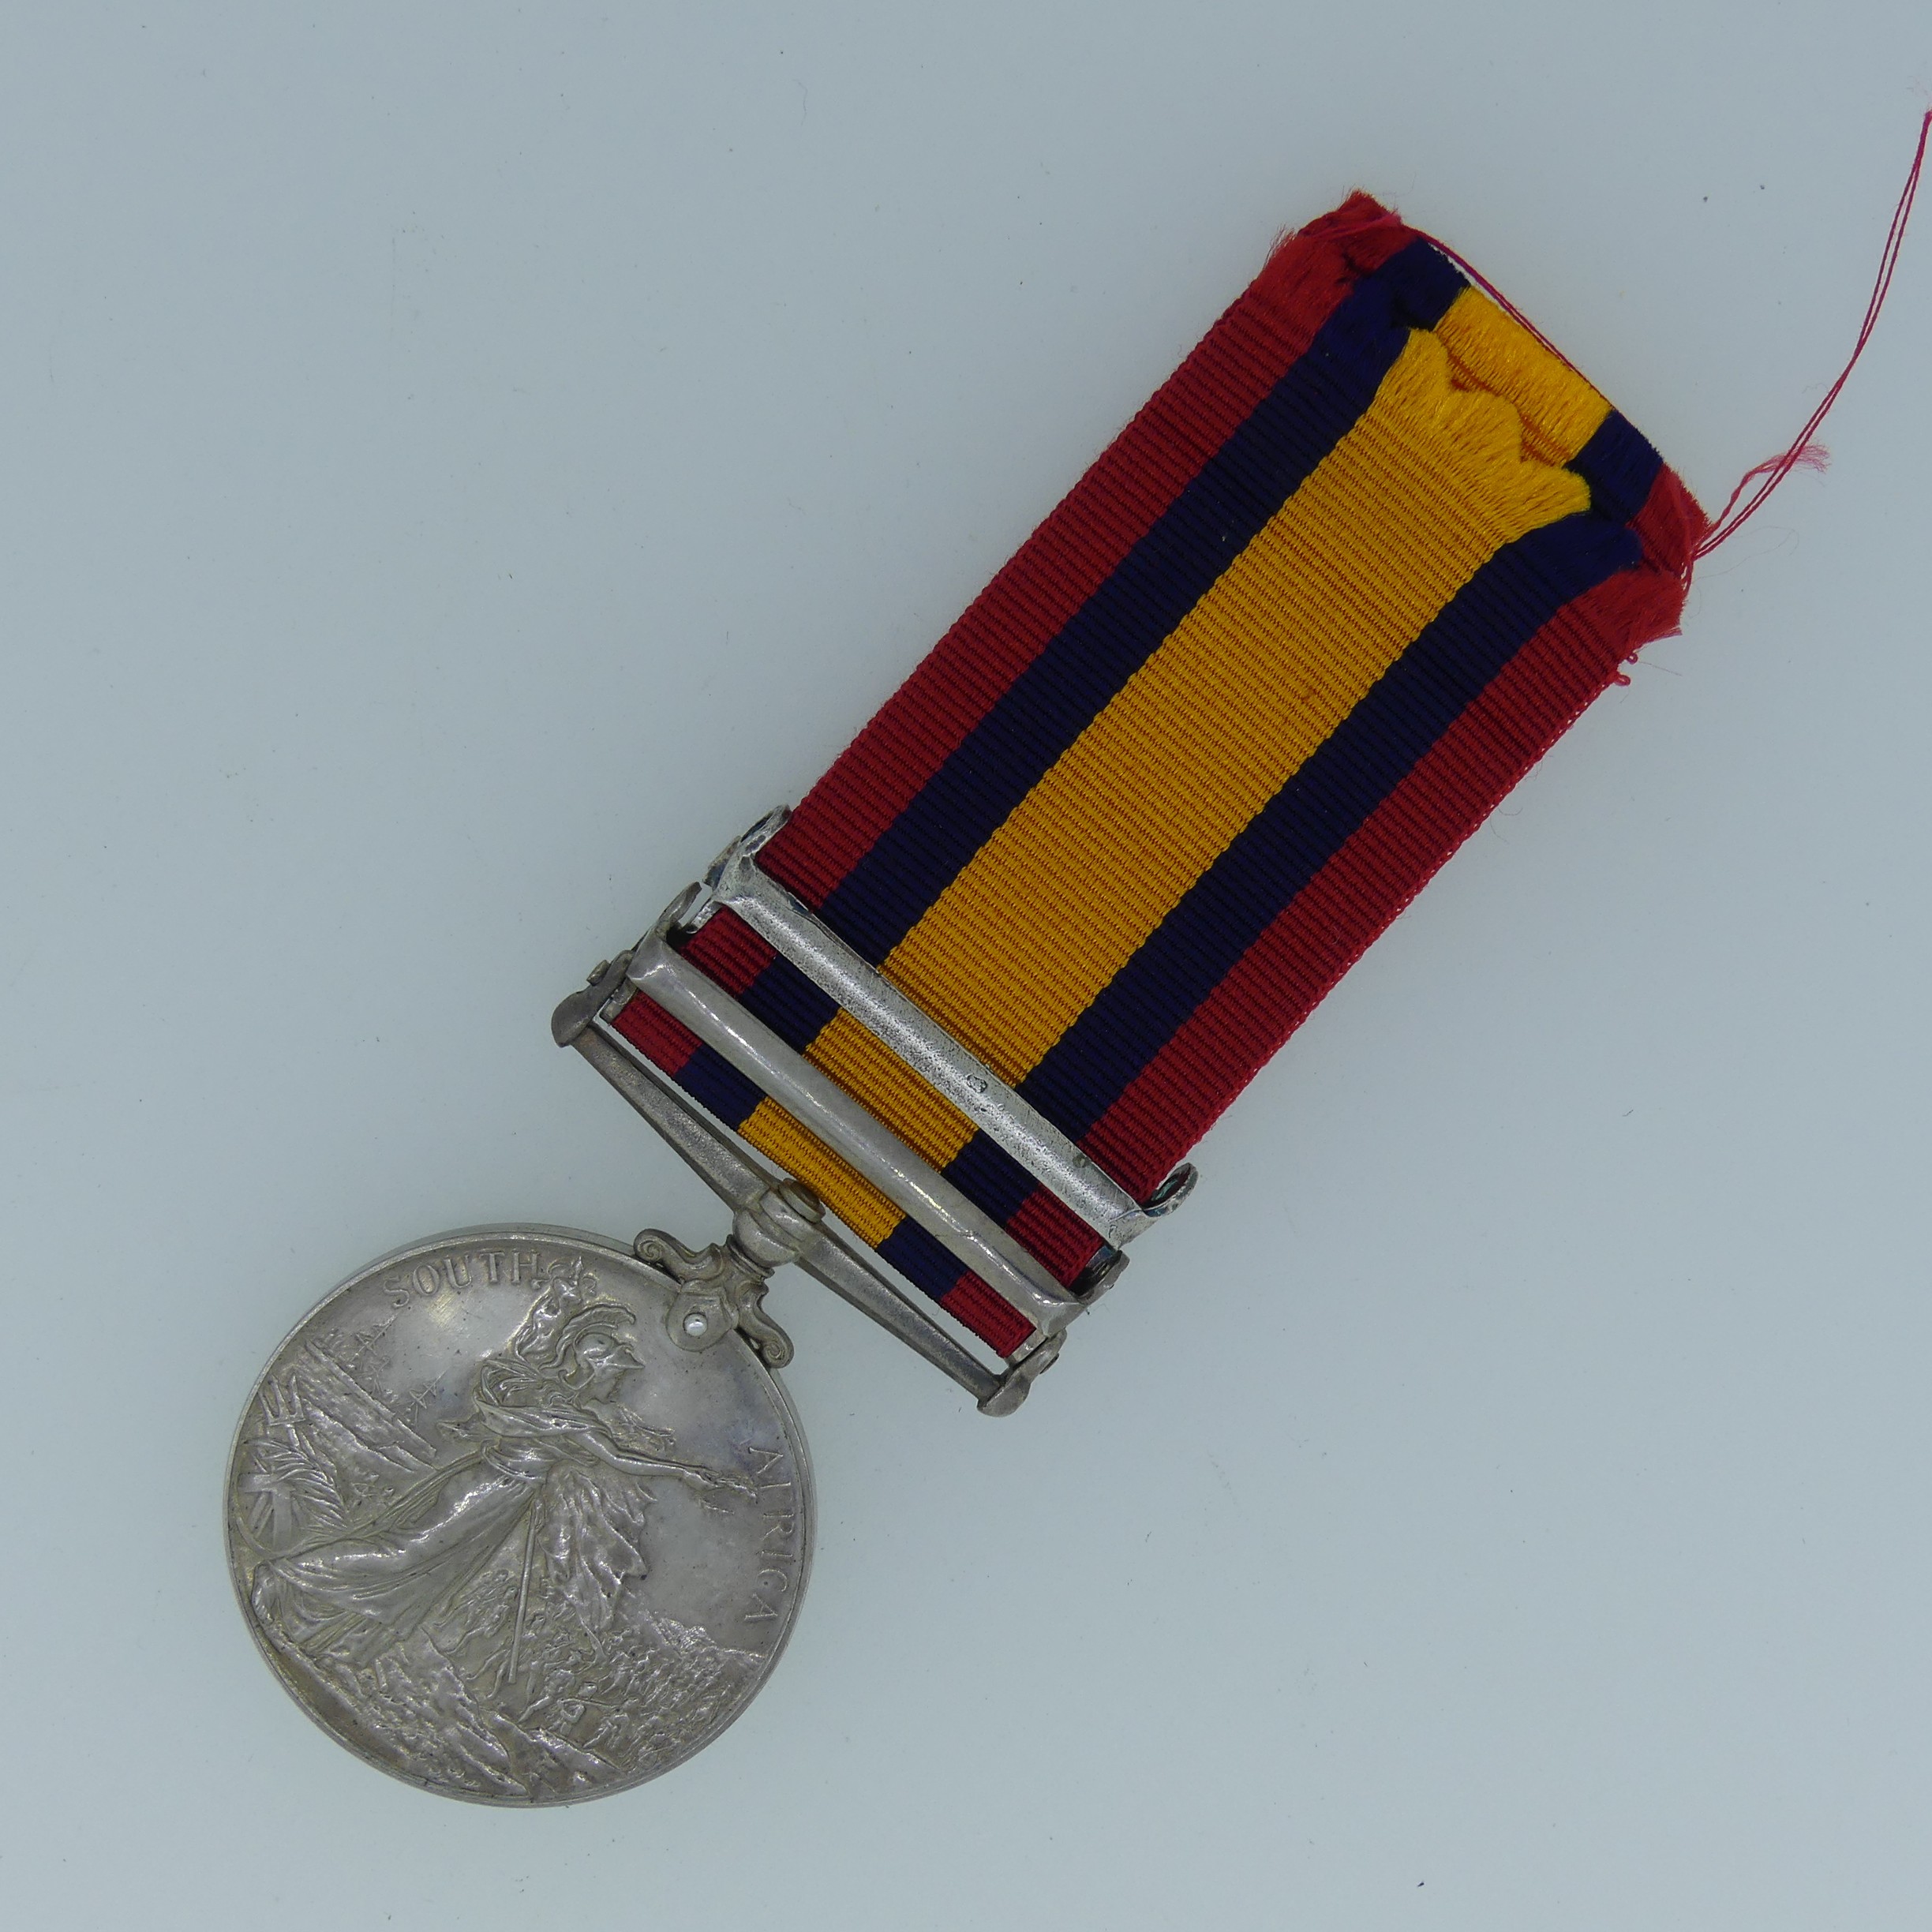 Queen's South Africa Medal (two clasps: Transvaal, Cape Colony) 65776 Gnr R. Bunting R.F.A. - Image 2 of 6